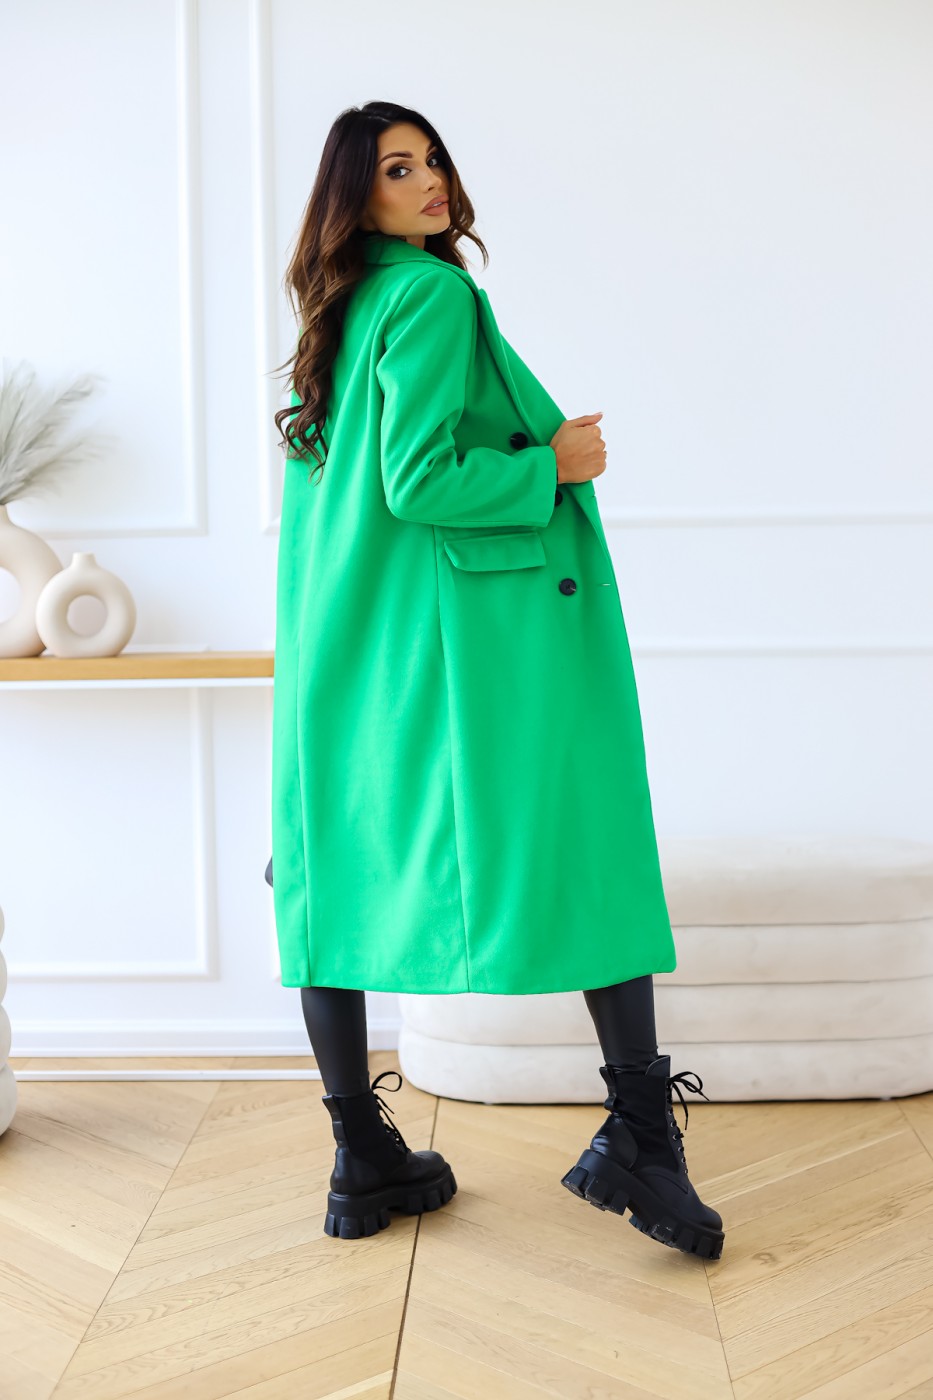 Trench Coat Outfit | Green Aesthetic, Blue Aesthetic Vibrant Colors Tr ...